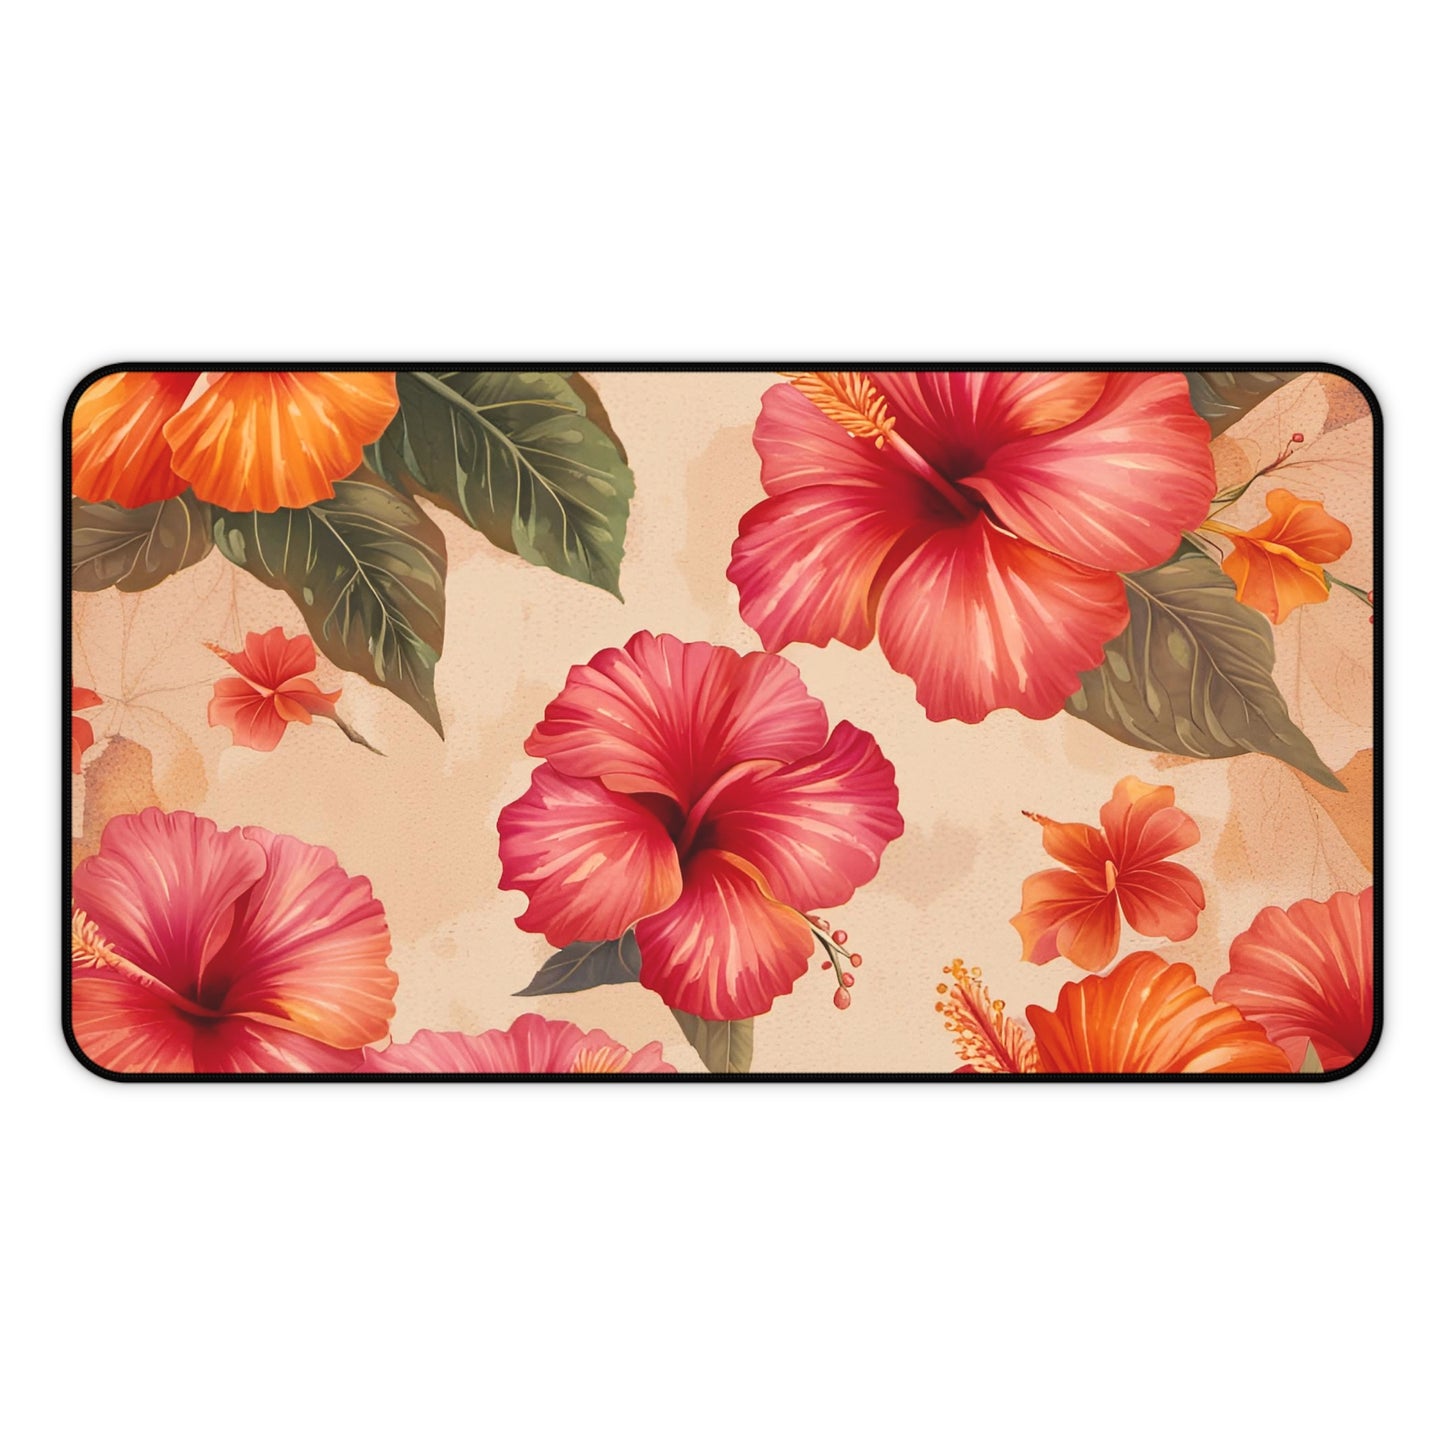 Hibiscus Flowers on Distressed Background Printed on Desk mat 12x22